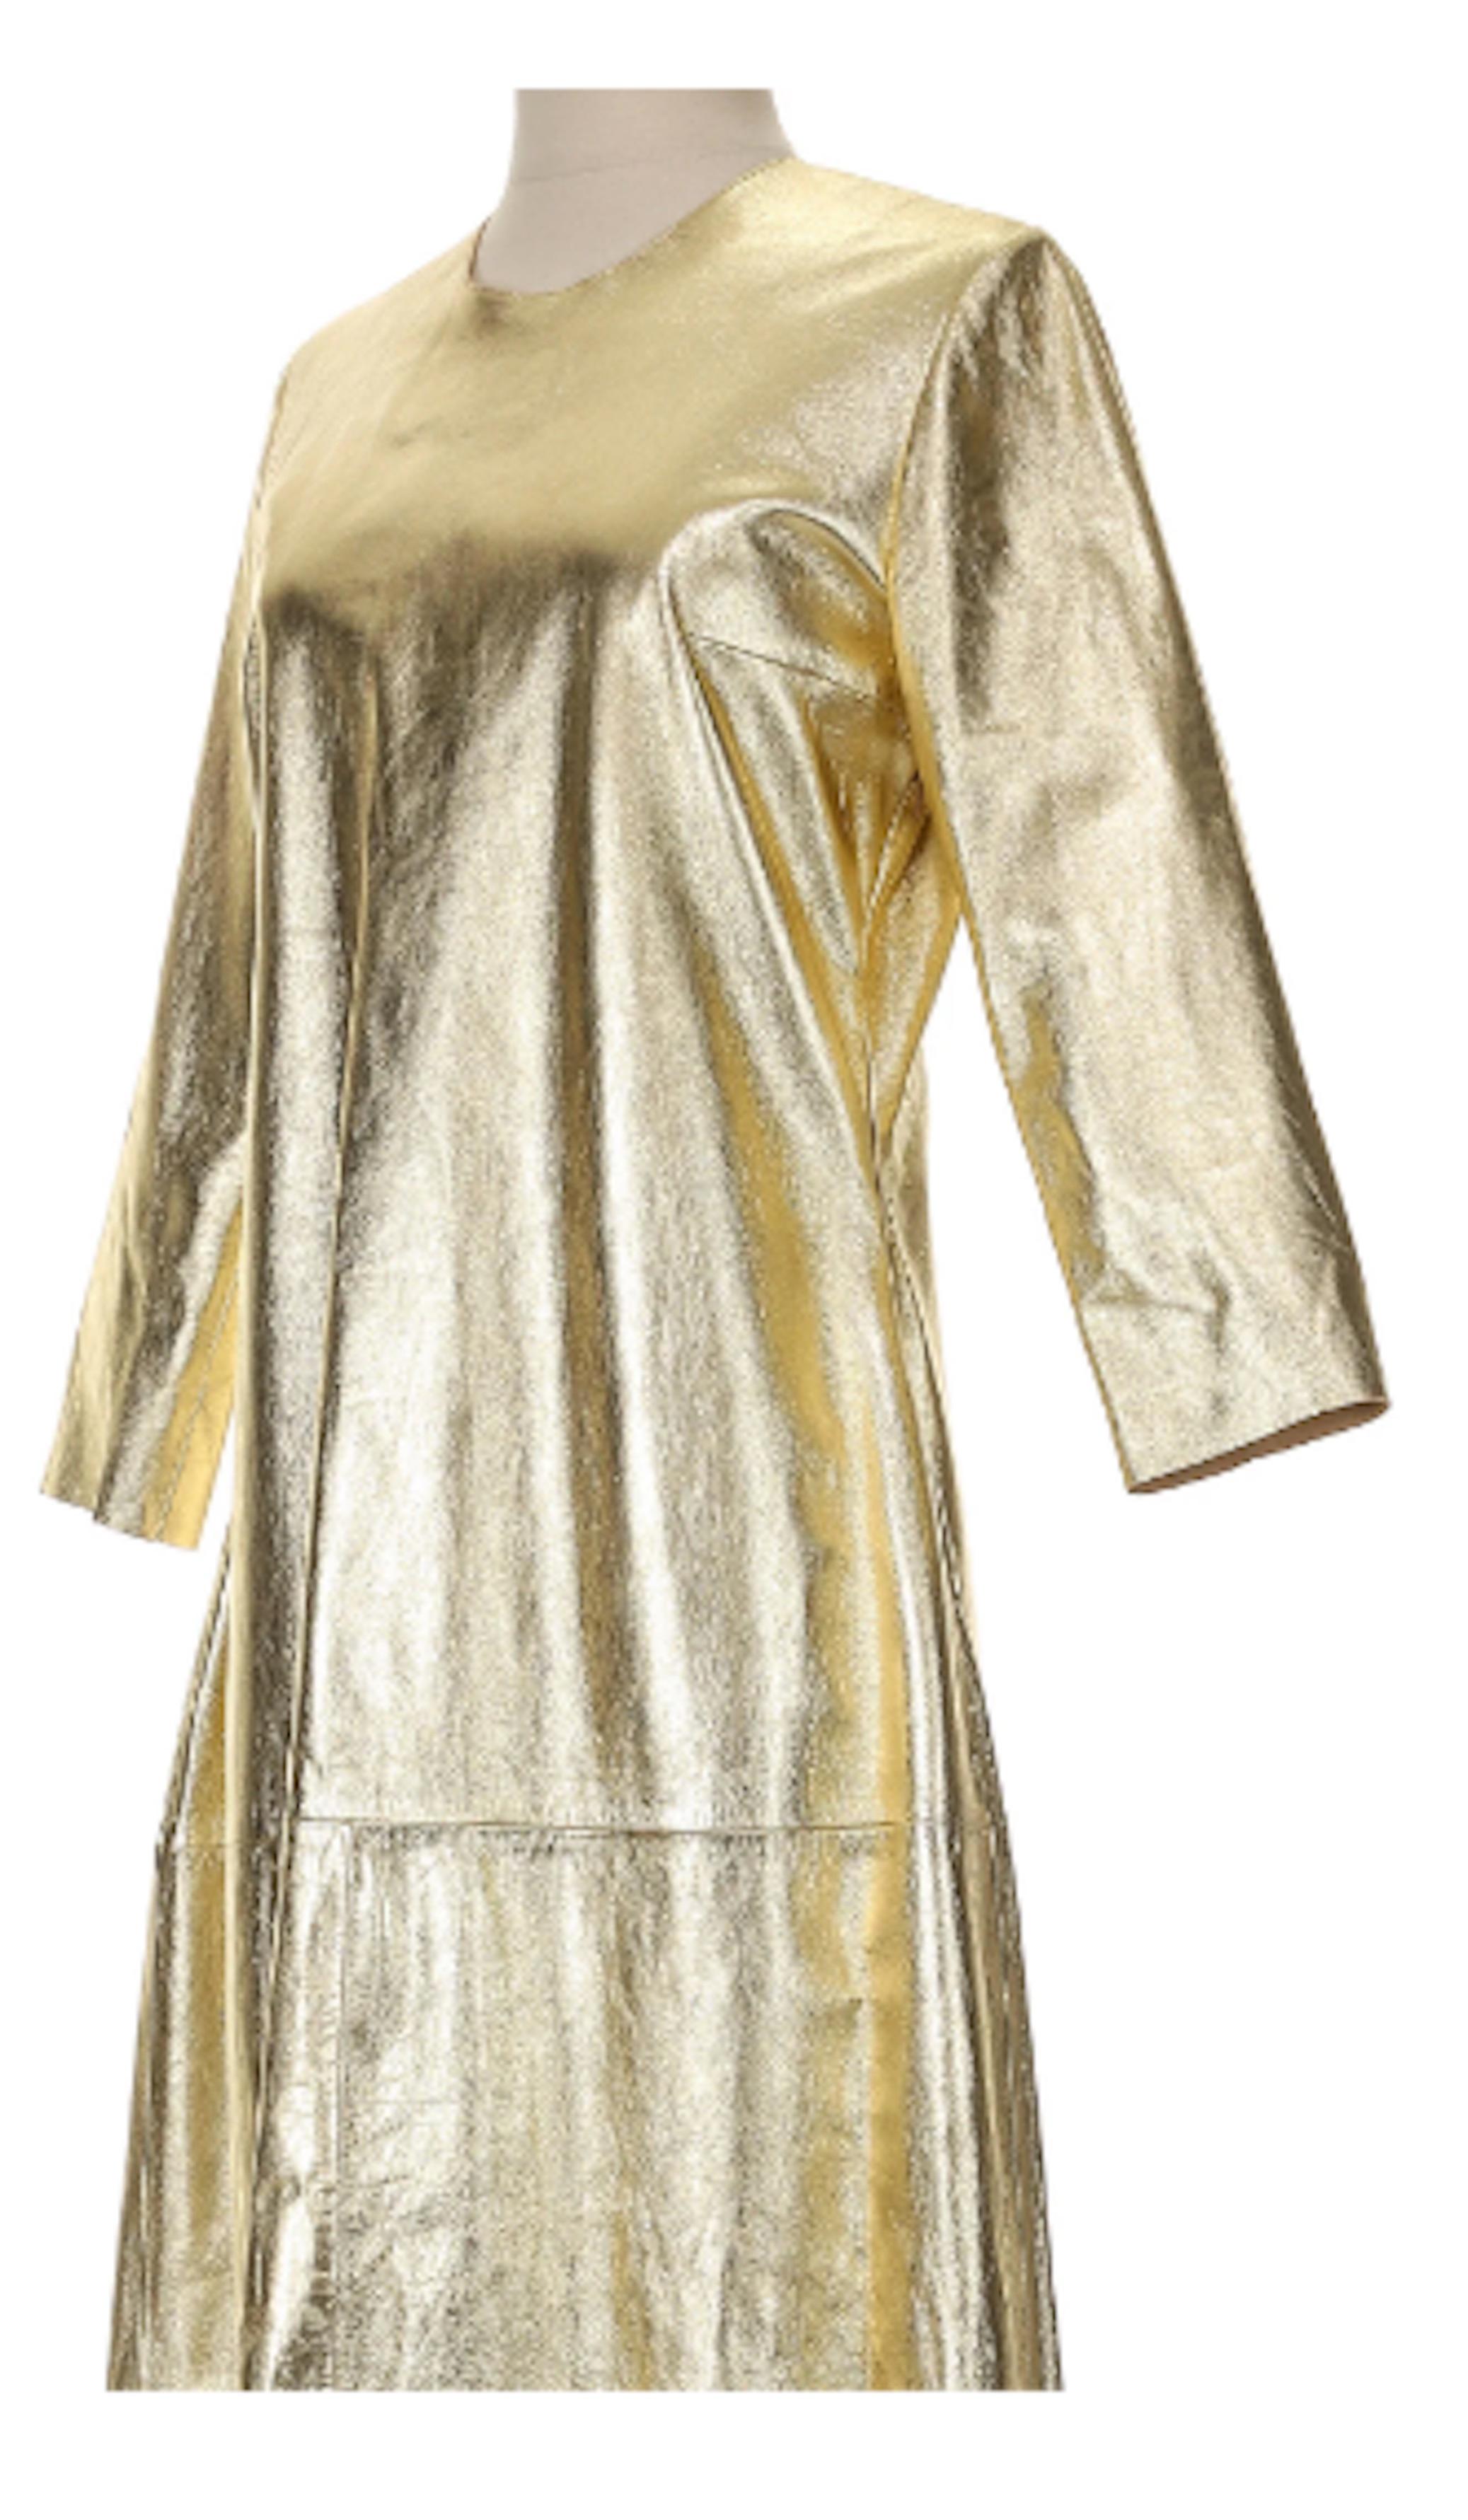 Jean-Claude Jitrois 3/4 Sleeve Gold Leather Gown.Made of 100% Lamb Leather. Exceptional and unique floor length gown with lace up details in the back and a high-low hem
- Hidden zipper fastening on left side
- Unlined
- Likely a size FR 40
-